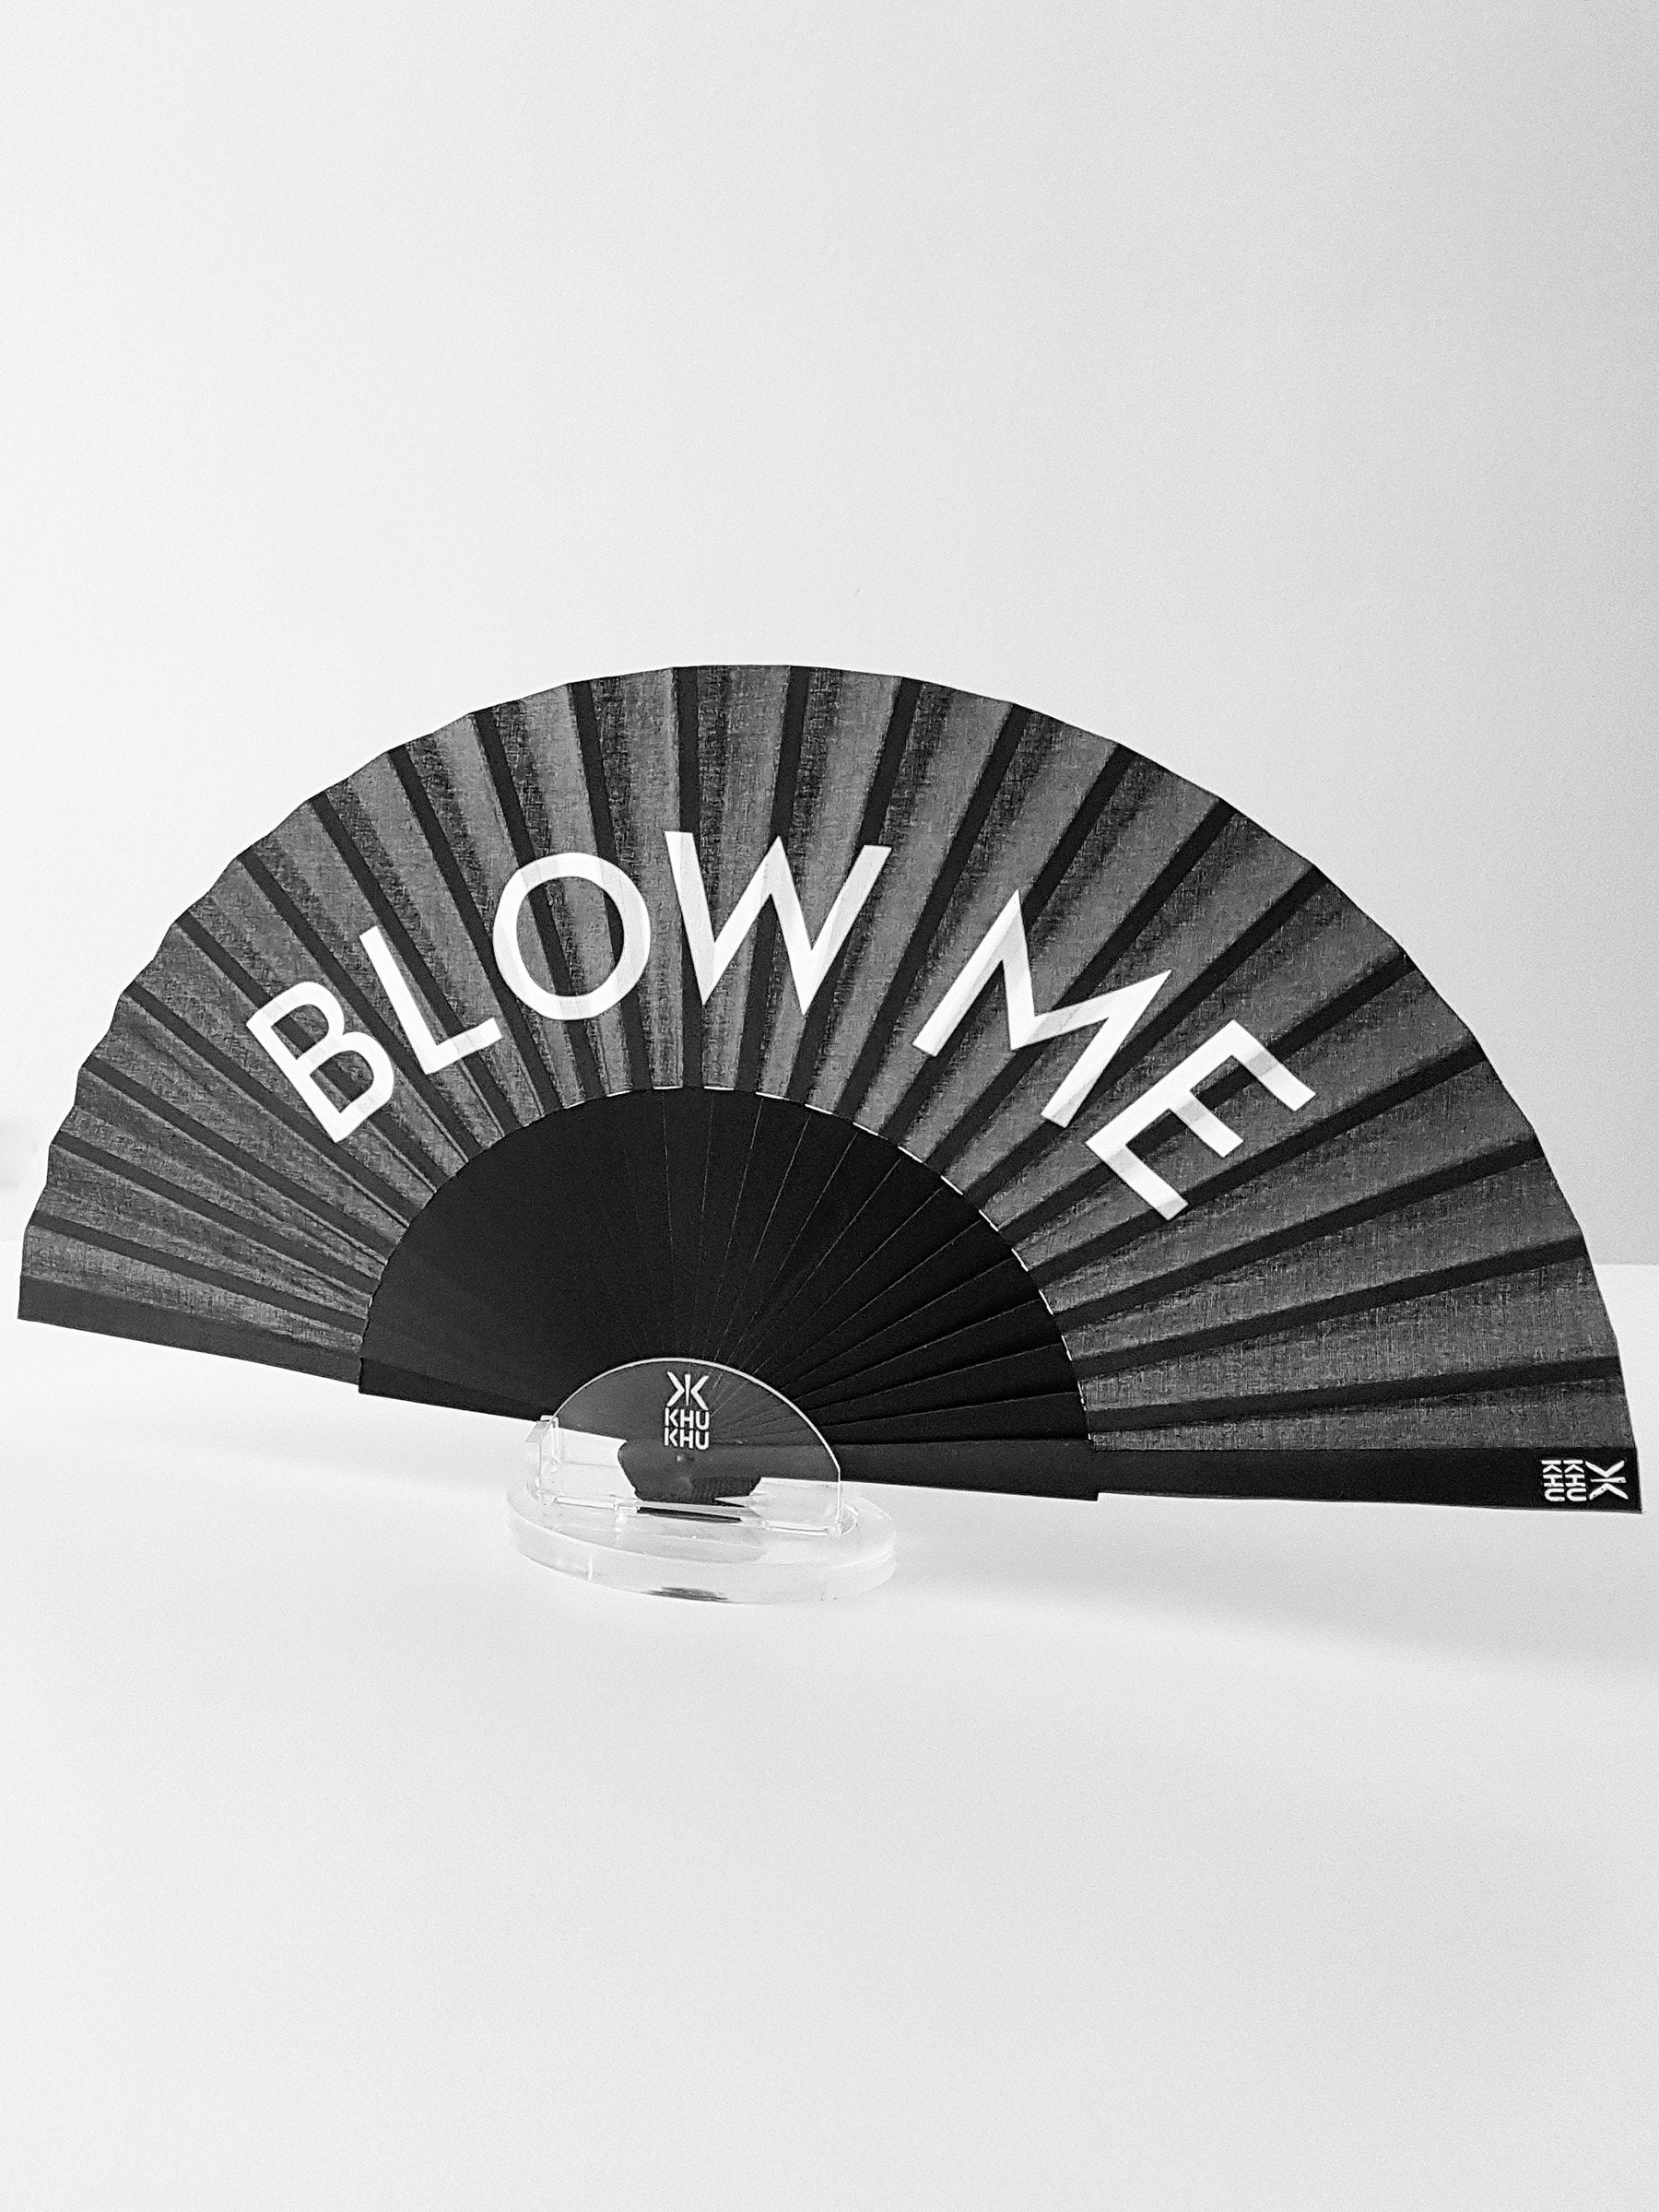 Khu Khu Blow Me Hand-Fan. White Font BLOW ME on black background with black wooden sticks and black rivet. Fan sits in acrylic table stand. 